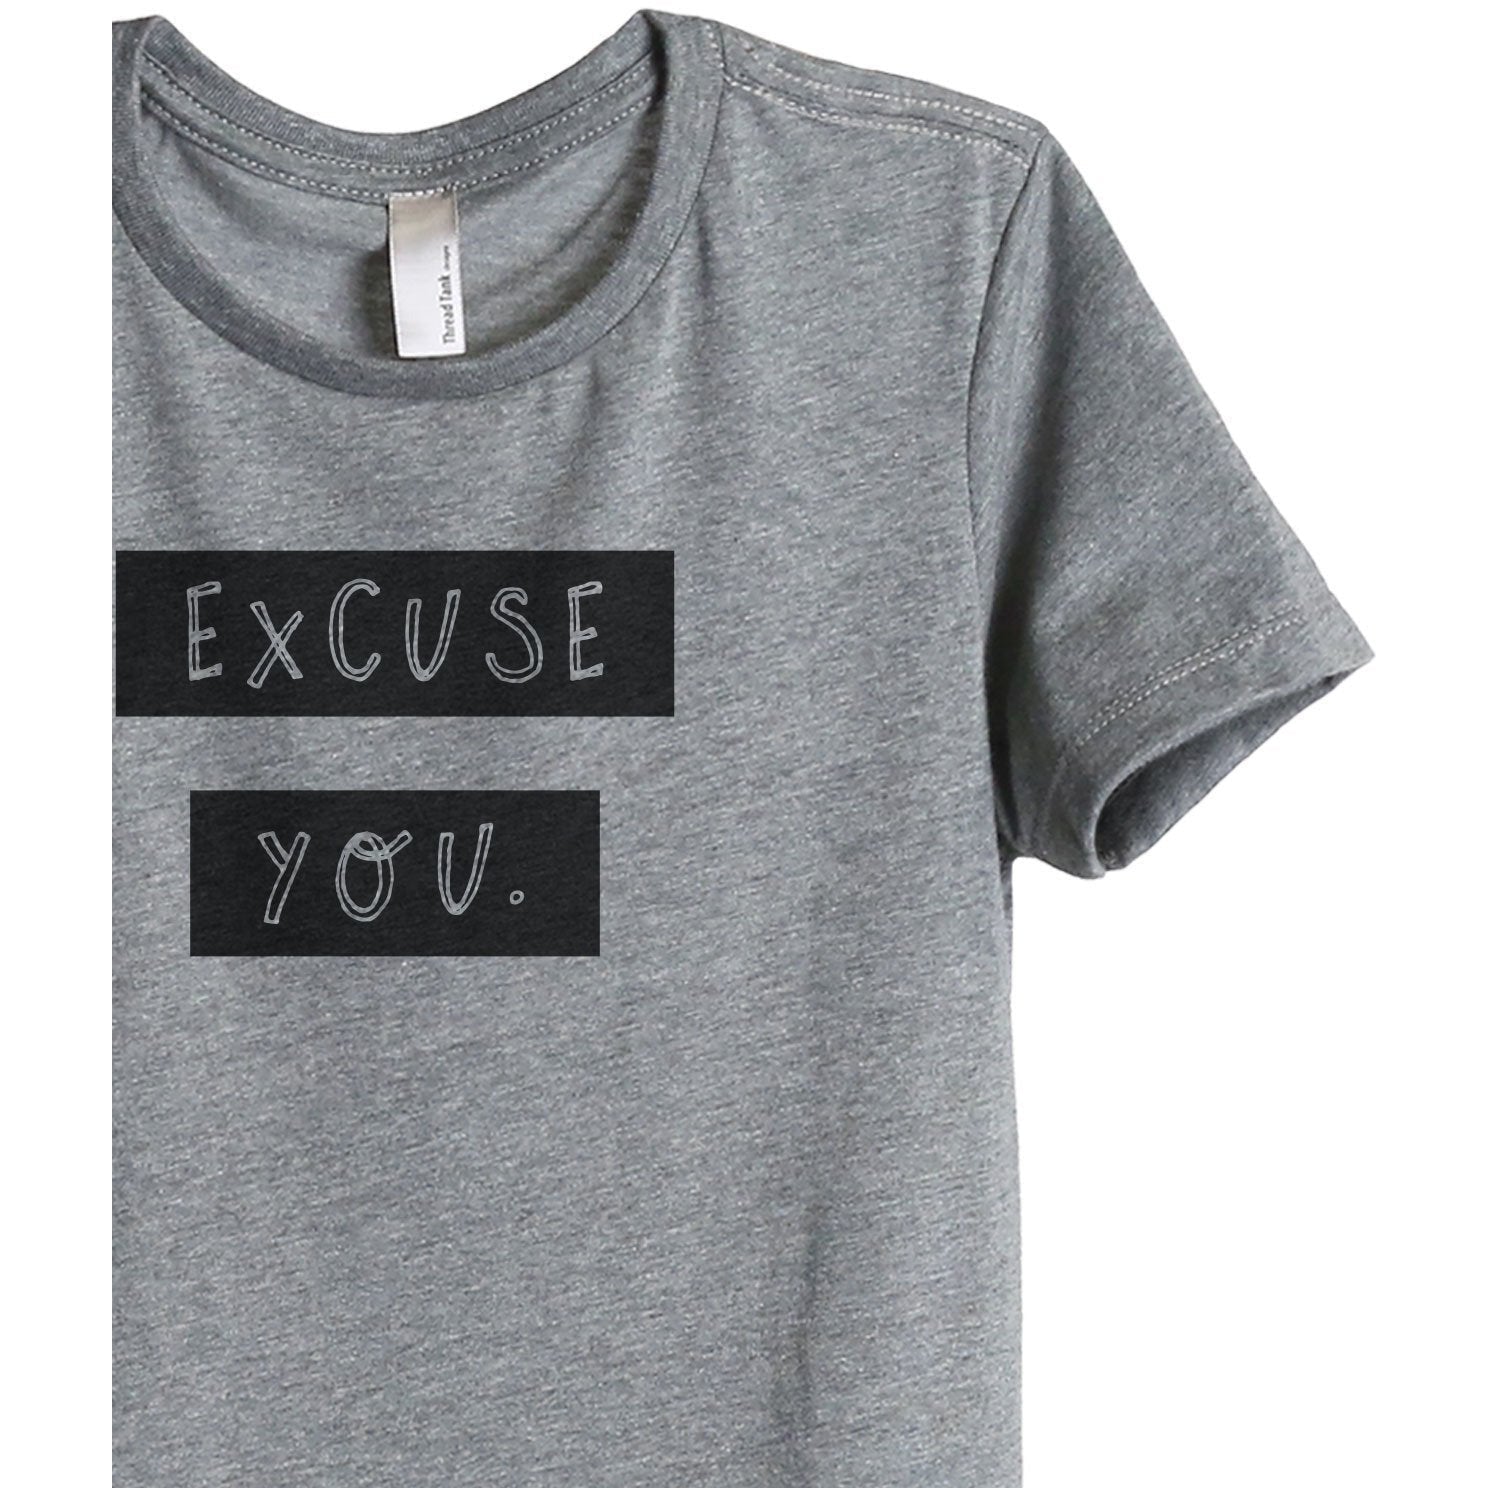 Excuse You Women's Relaxed Crewneck T-Shirt Top Tee Heather Grey Zoom Details
